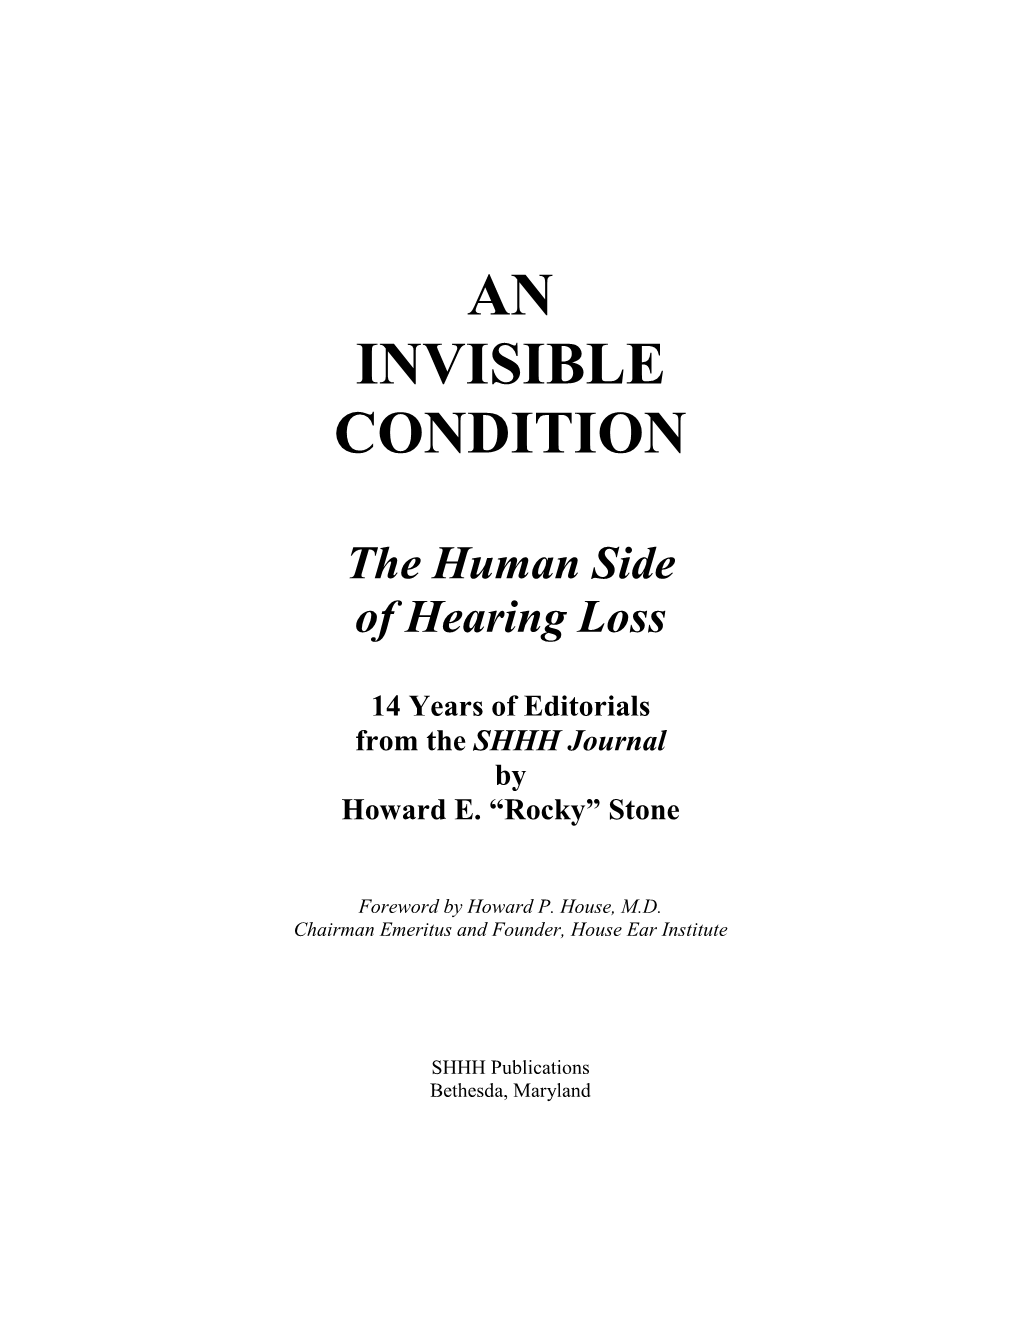 An Invisible Condition